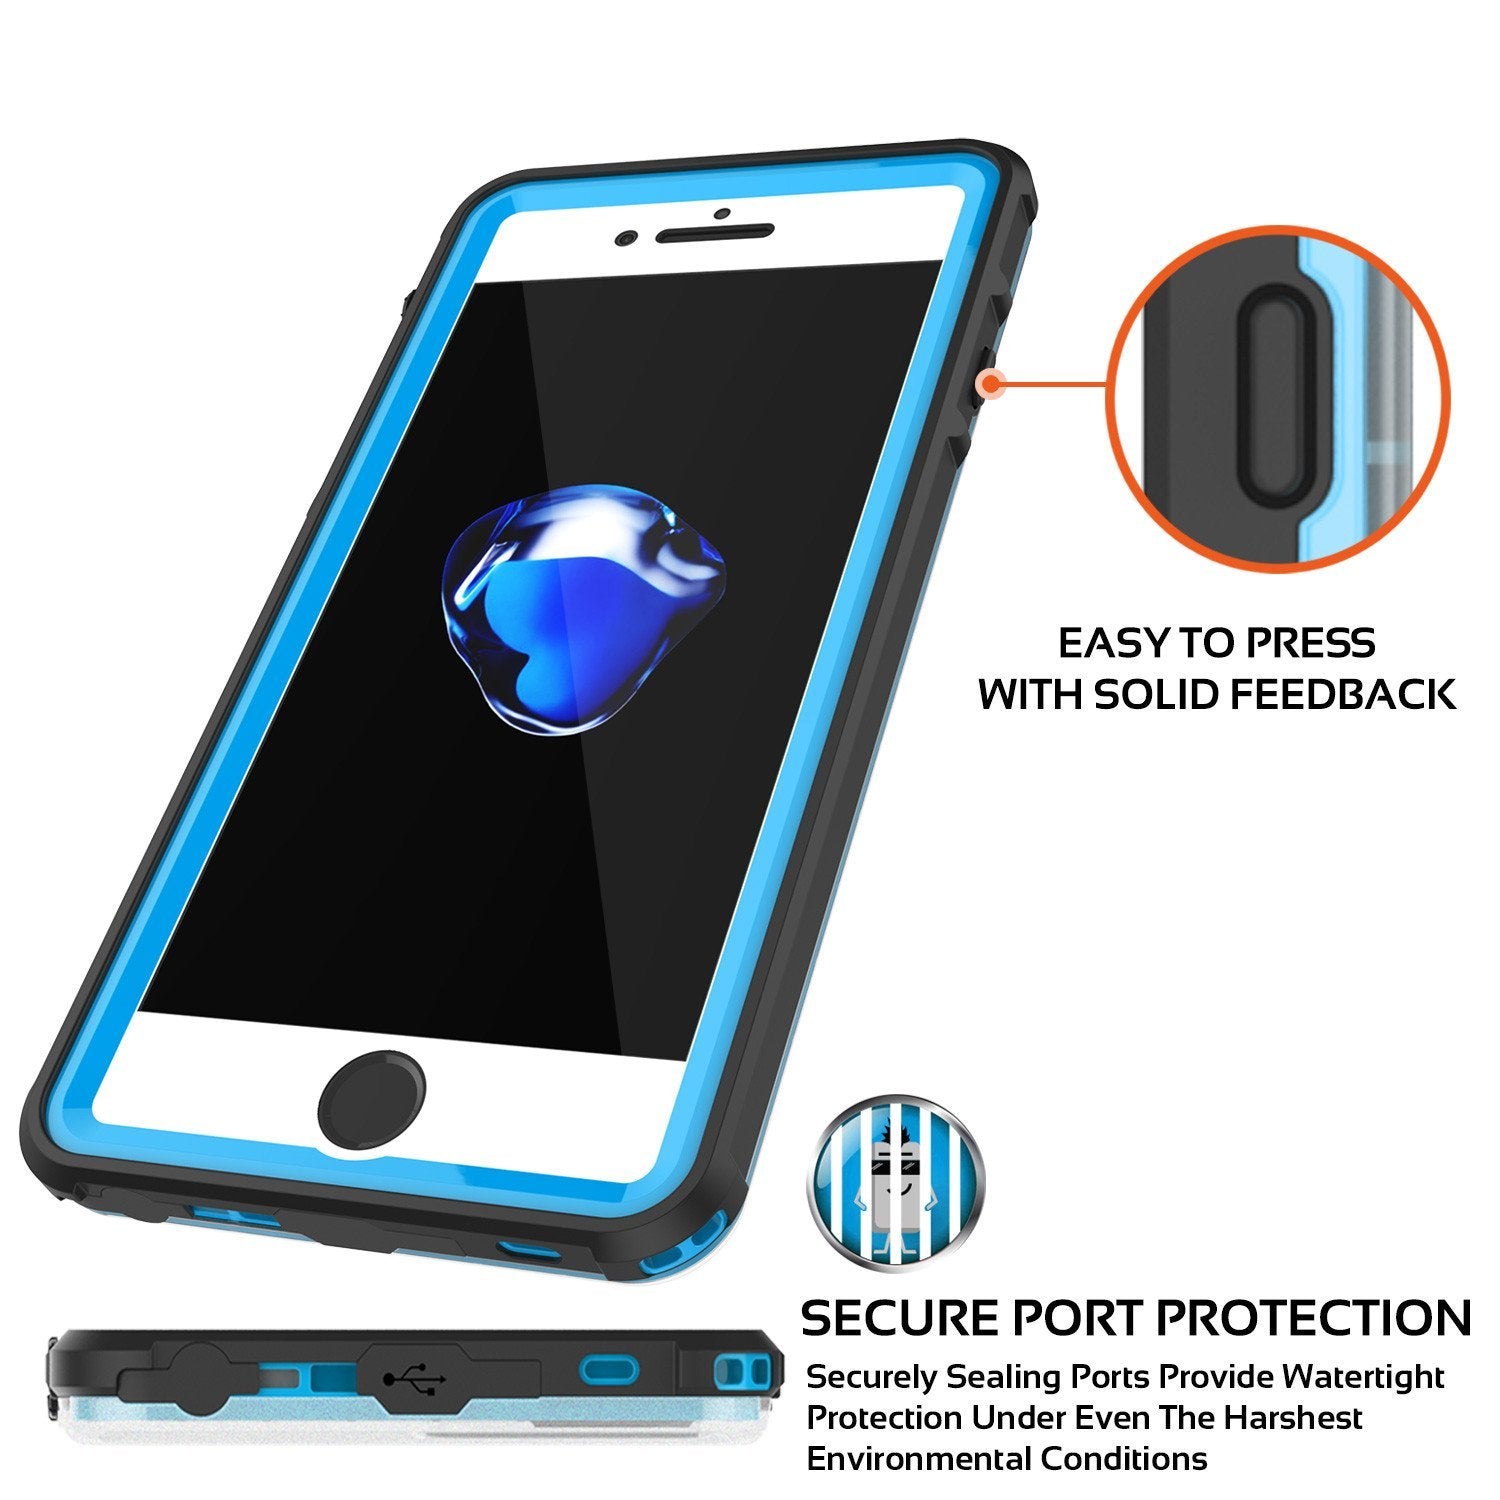 iPhone 8+ Plus Waterproof Case, PUNKcase CRYSTAL Light Blue  W/ Attached Screen Protector  | Warranty - PunkCase NZ